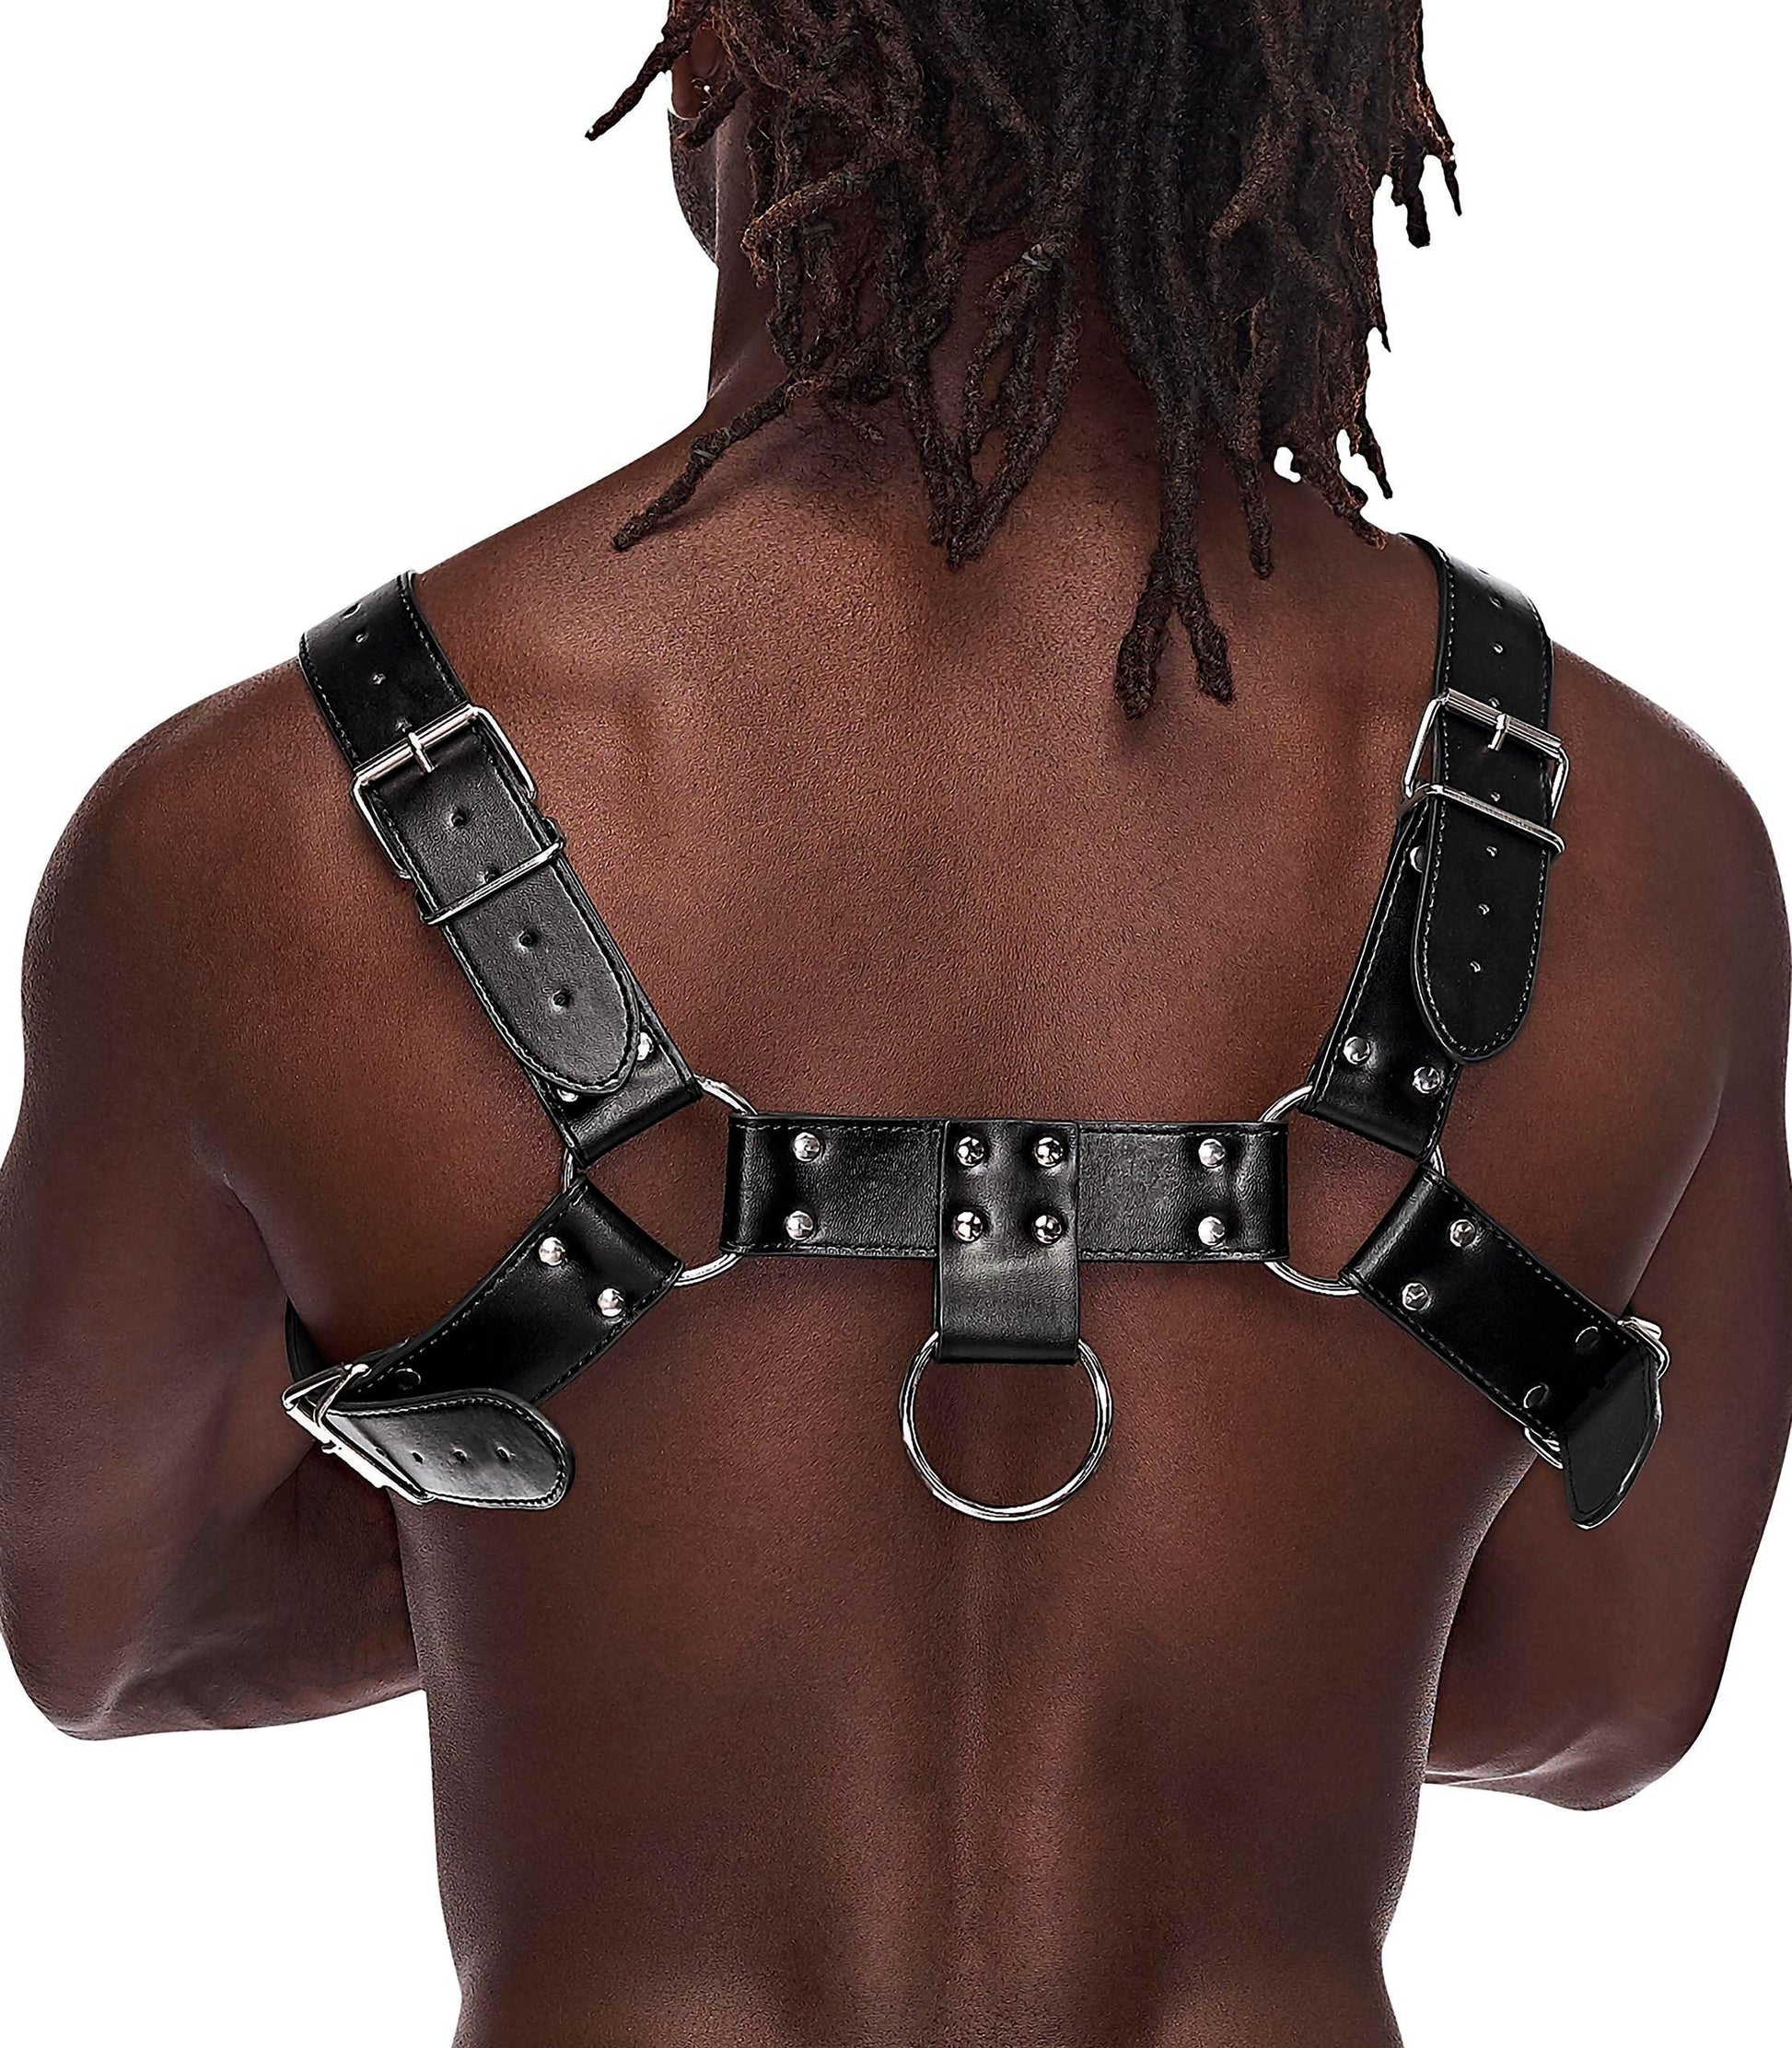 Aries Leather Harness - One Size - Black - My Sex Toy Hub